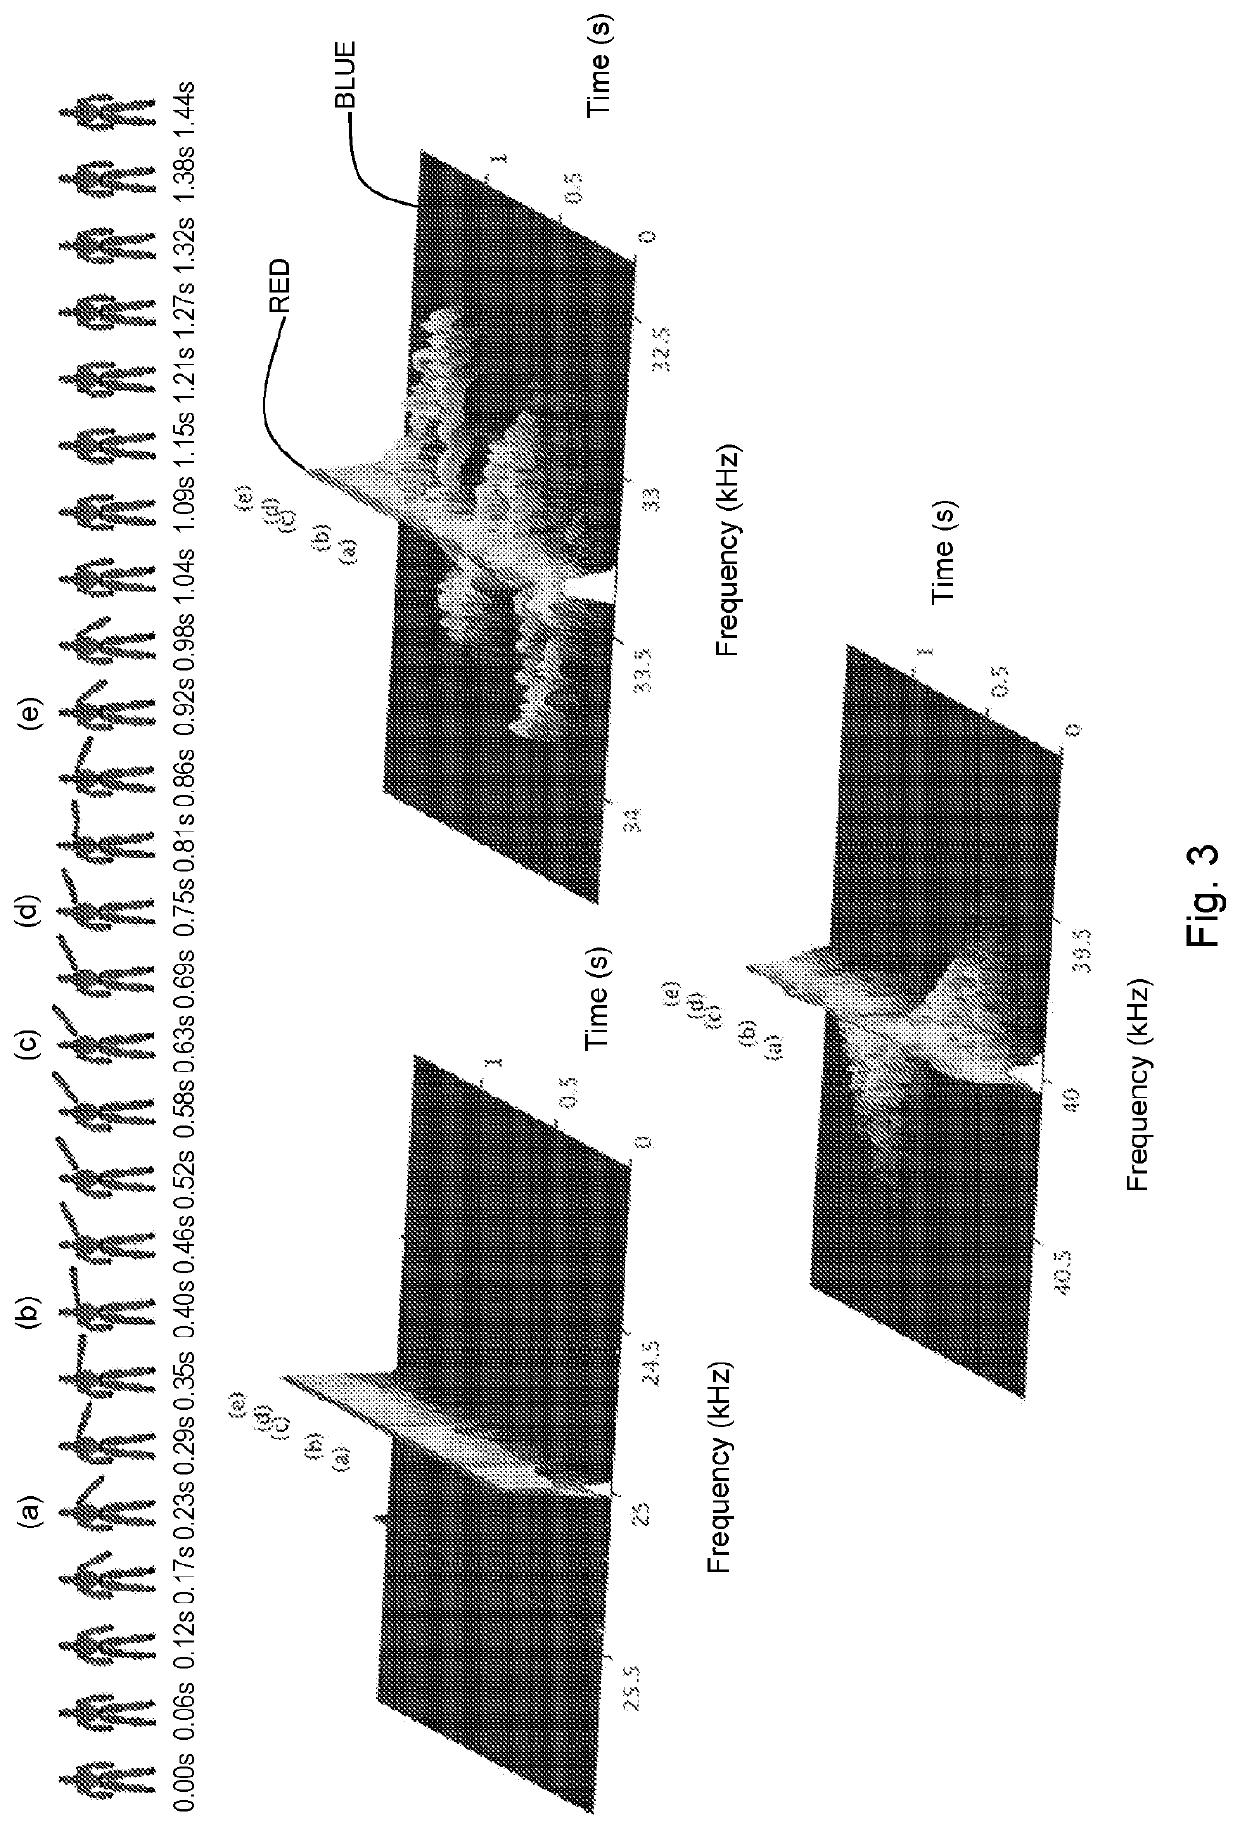 Systems and method for action recognition using micro-doppler signatures and recurrent neural networks